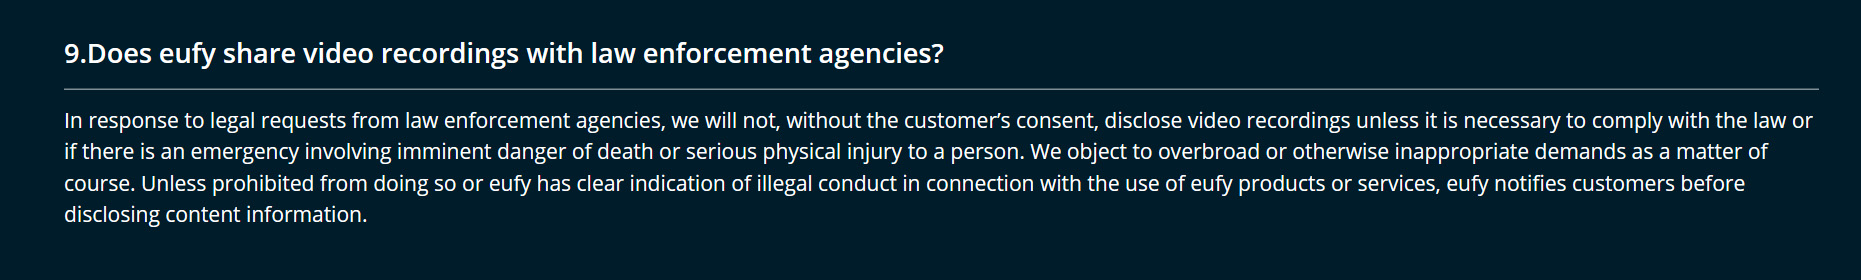 The removed statement on sharing footage with law enforcement on Eufy's privacy policy